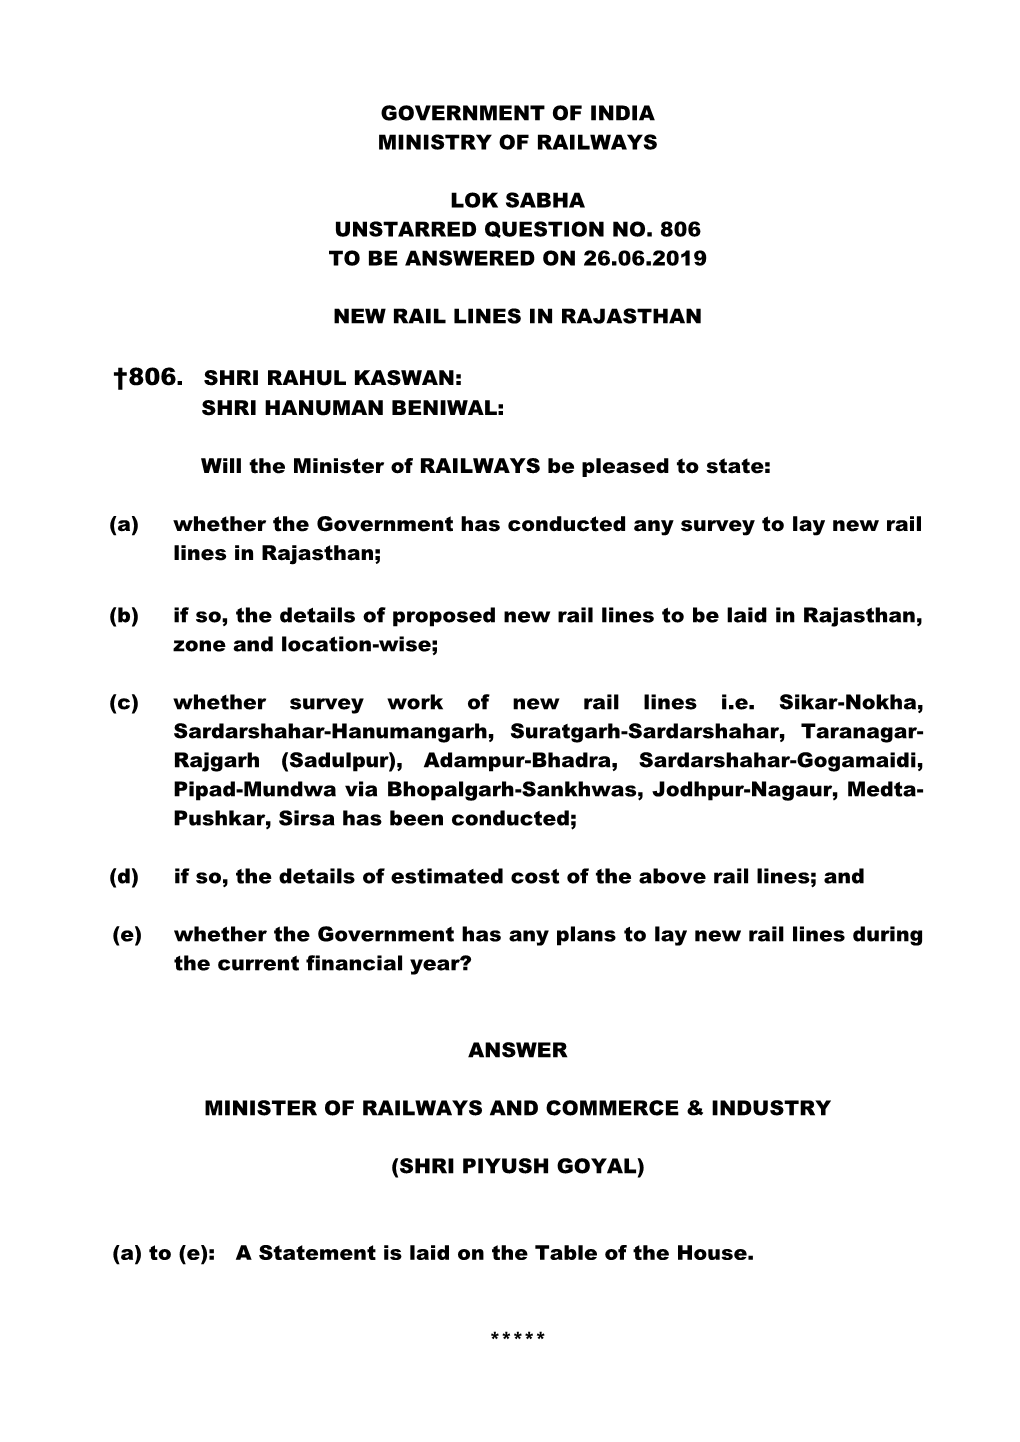 Government of India Ministry of Railways Lok Sabha Unstarred Question No. 806 to Be Answered on 26.06.2019 New Rail Lines In